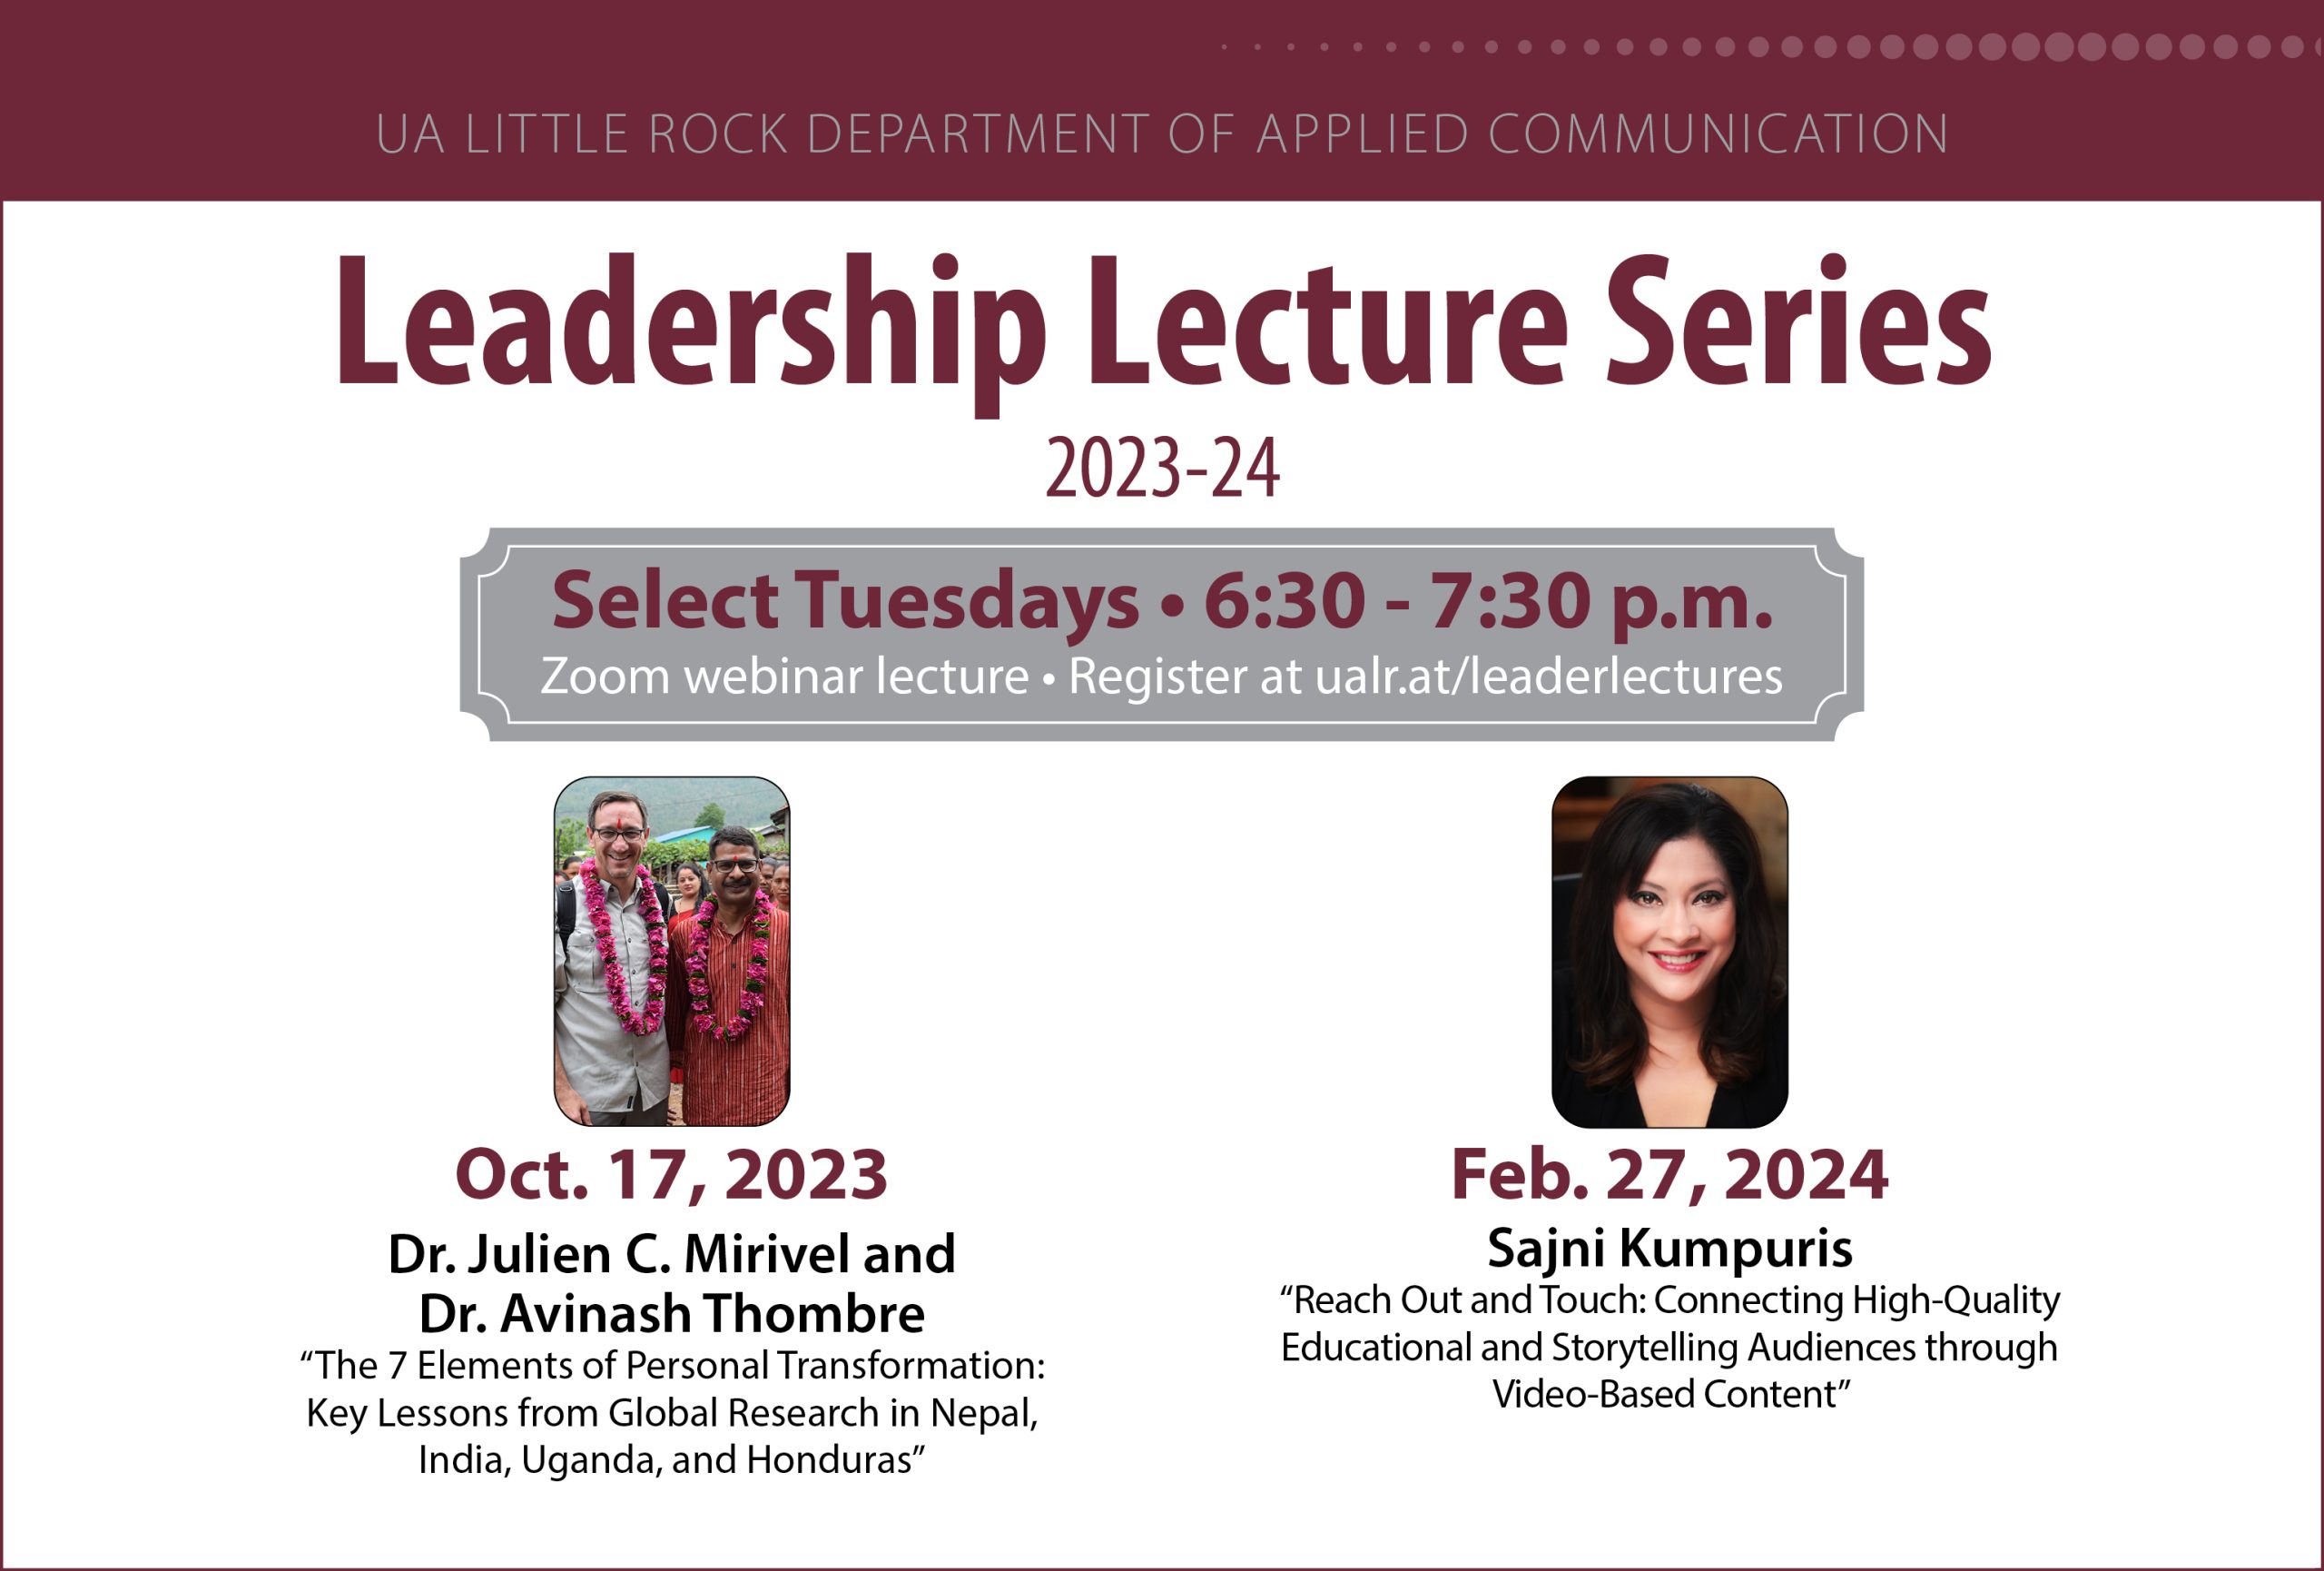 Dr. Julien Mirivel and Dr. Avinash Thombre, professors of applied communication at UA Little Rock, will present “The 7 Elements of Personal Transformation: Key Lessons from Global Research in Nepal, India, Uganda, and Honduras” Tuesday, Oct. 17, at 6:30 p.m.